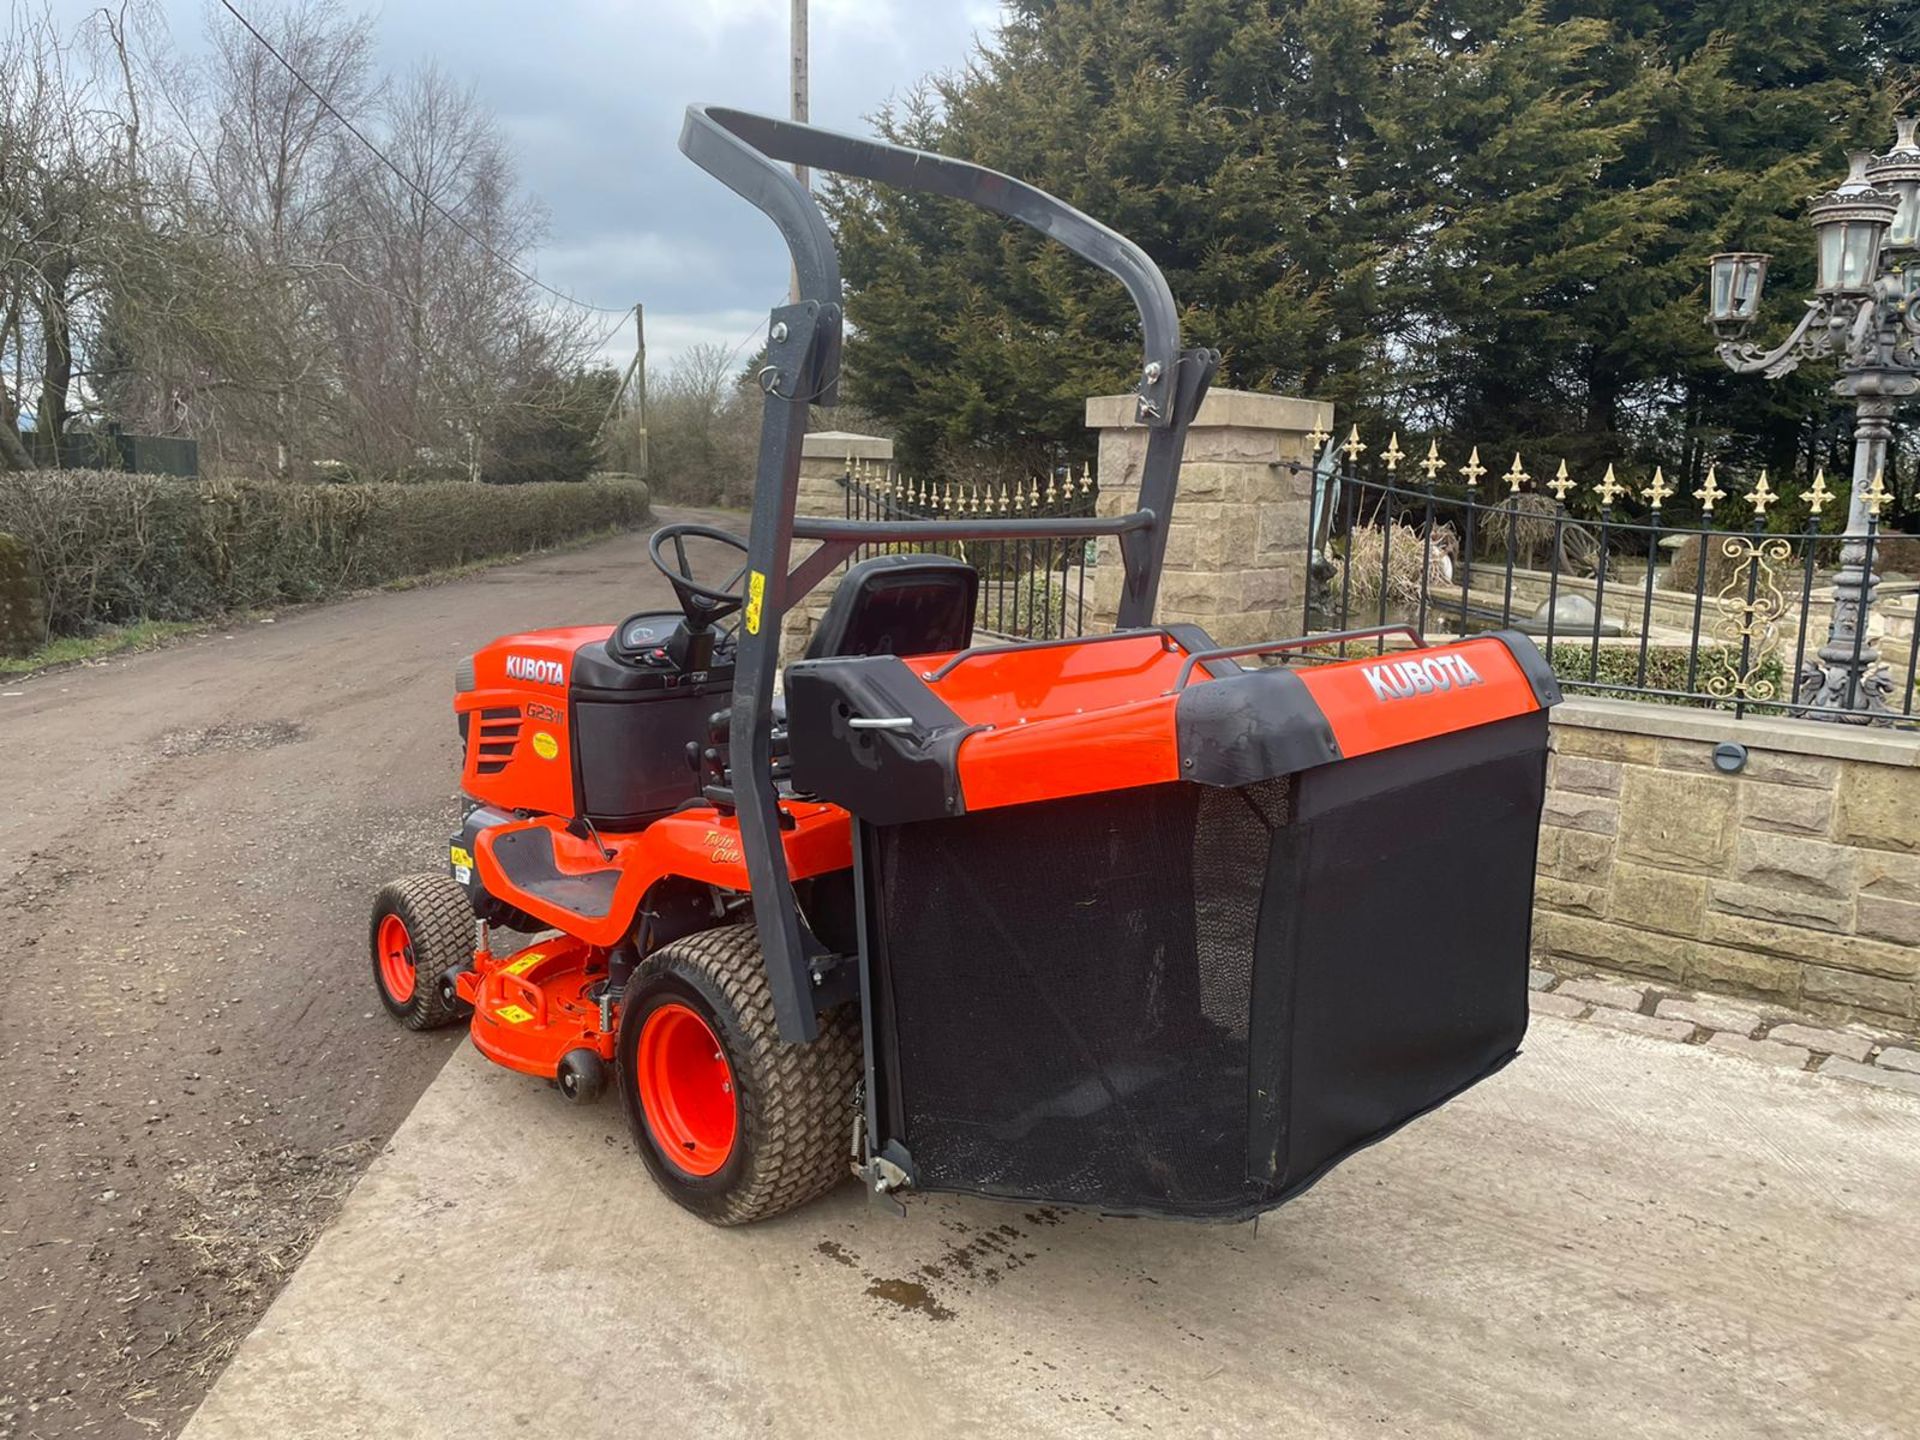 2015 KUBOTA G23-II RIDE ON MOWER, RUNS, DRIVES AND CUTS, IN MINT CONDITION, LOW 205 HOURS FROM NEW! - Image 6 of 8